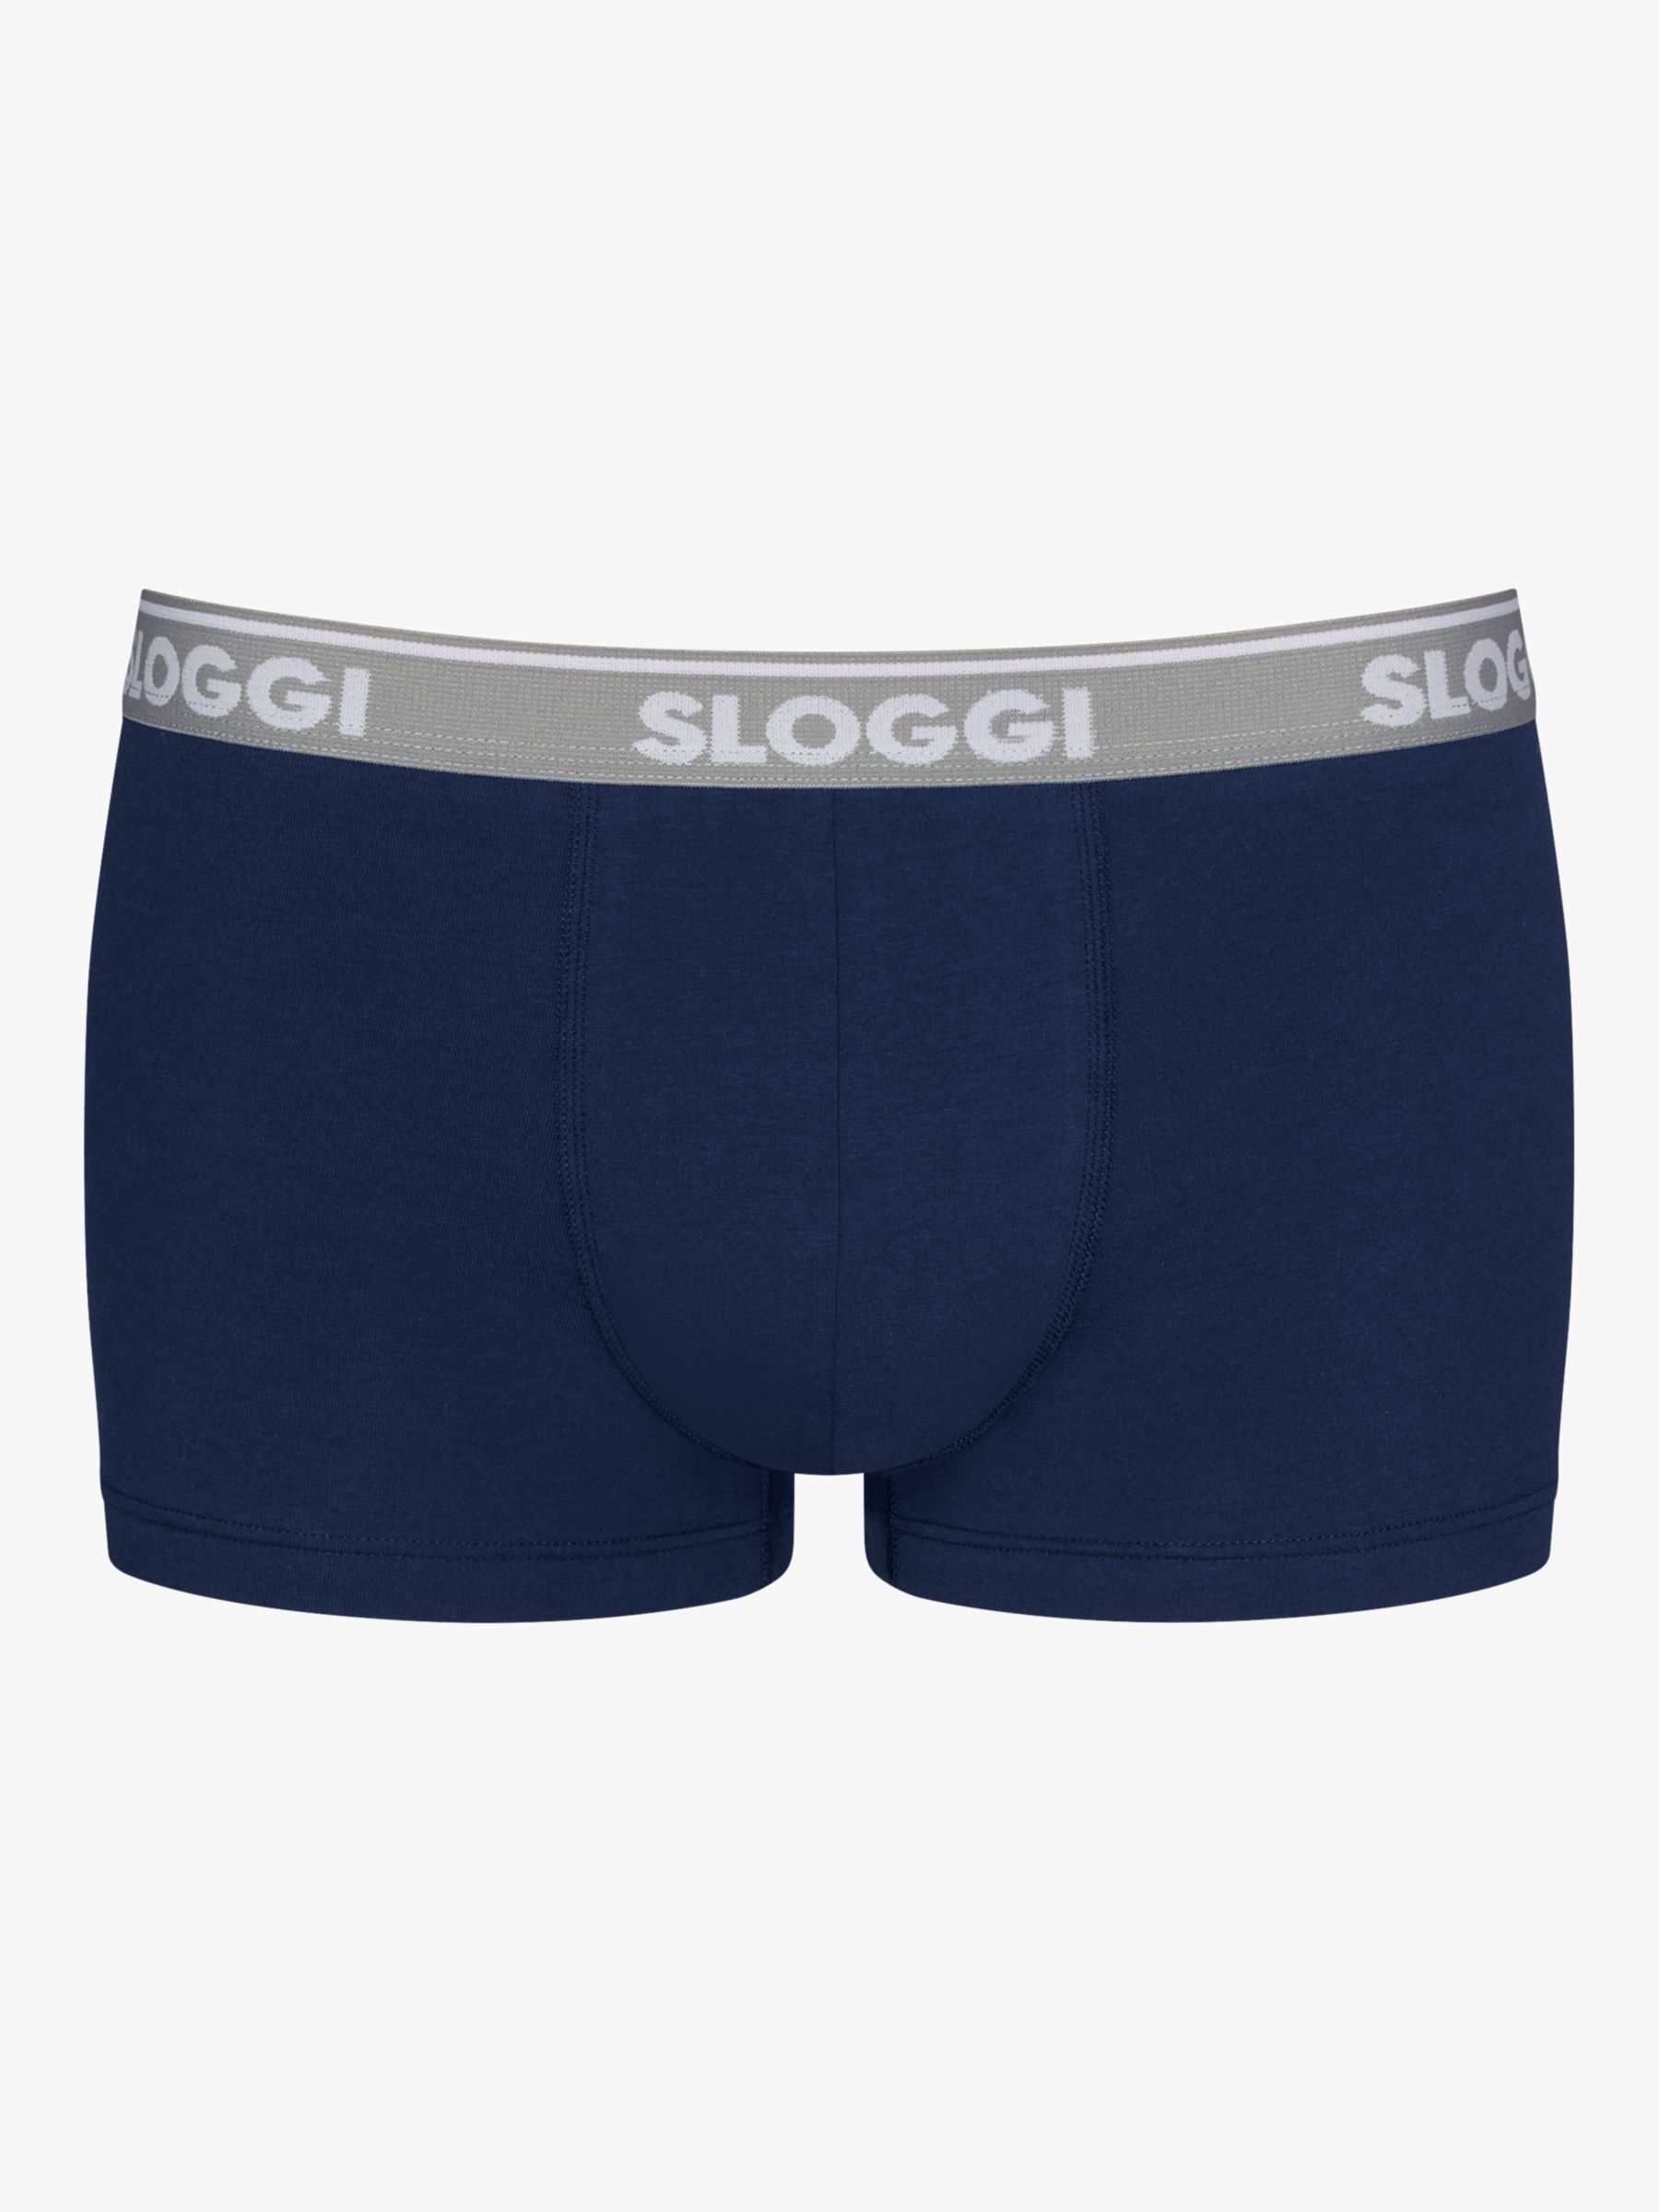 sloggi GO ABC Cotton Stretch Hipster Trunks, Pack of 6, Grey, M